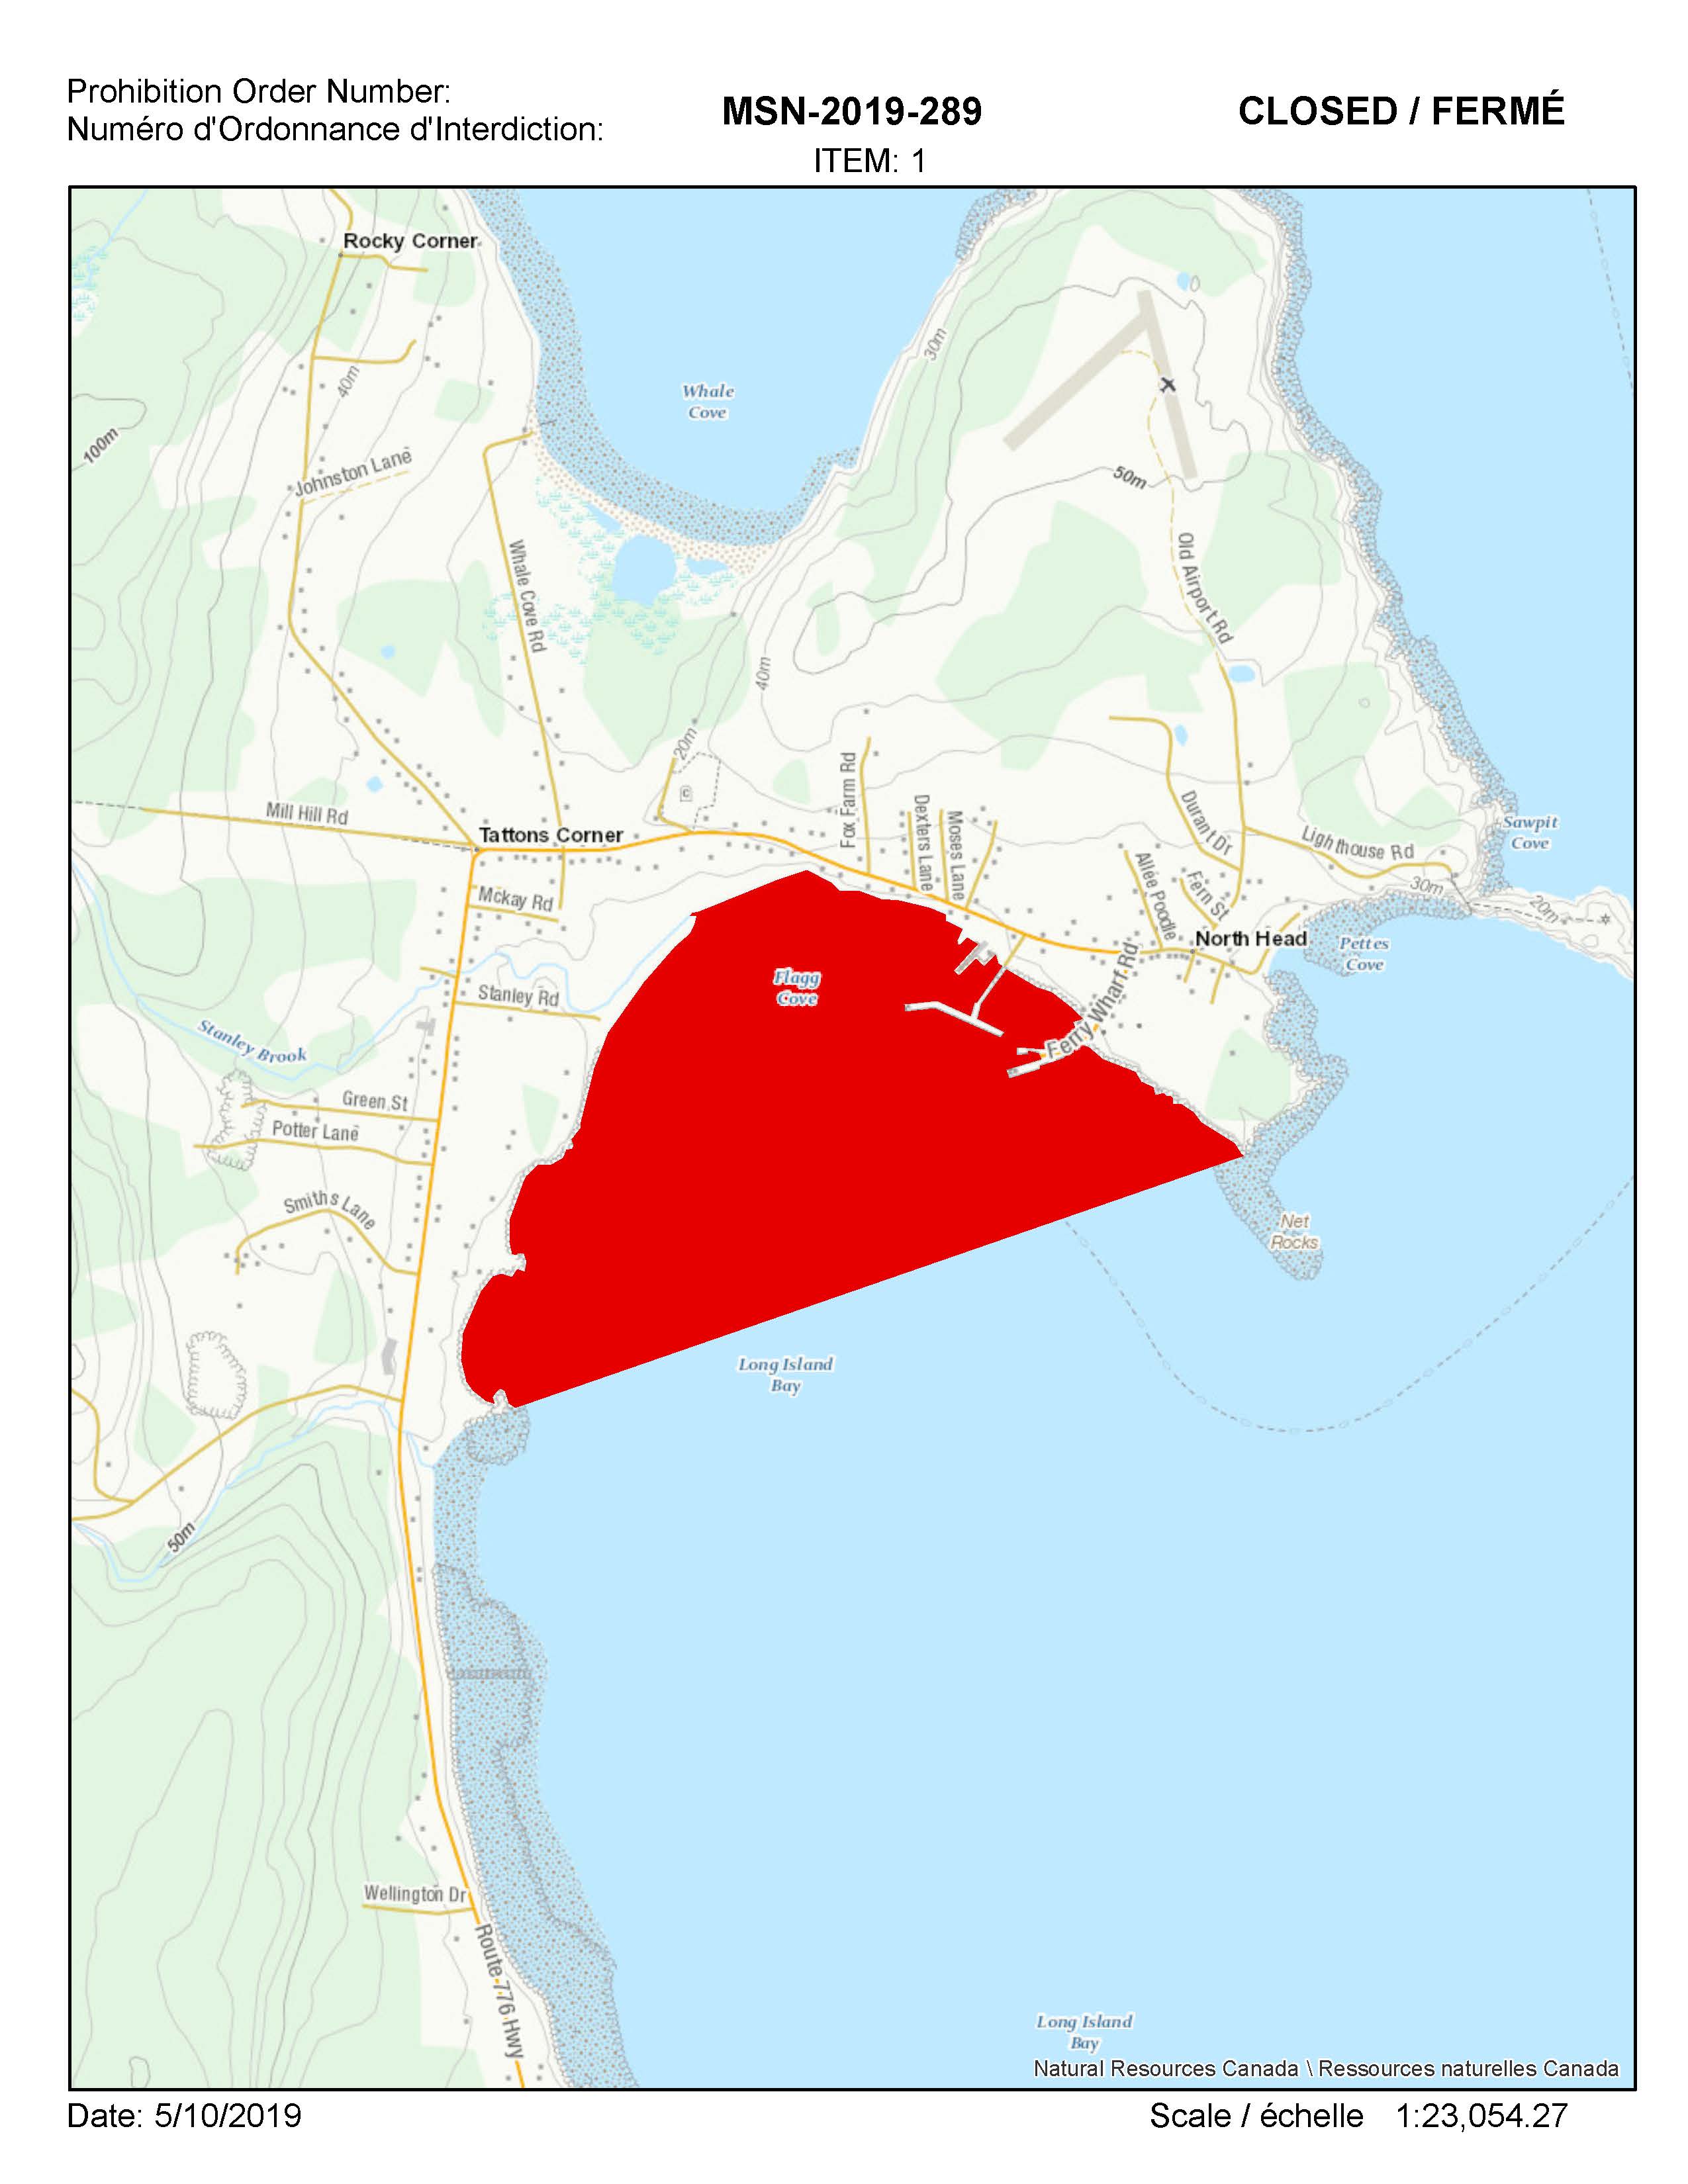 Map describing the affected areas as per the aformentioned notice.